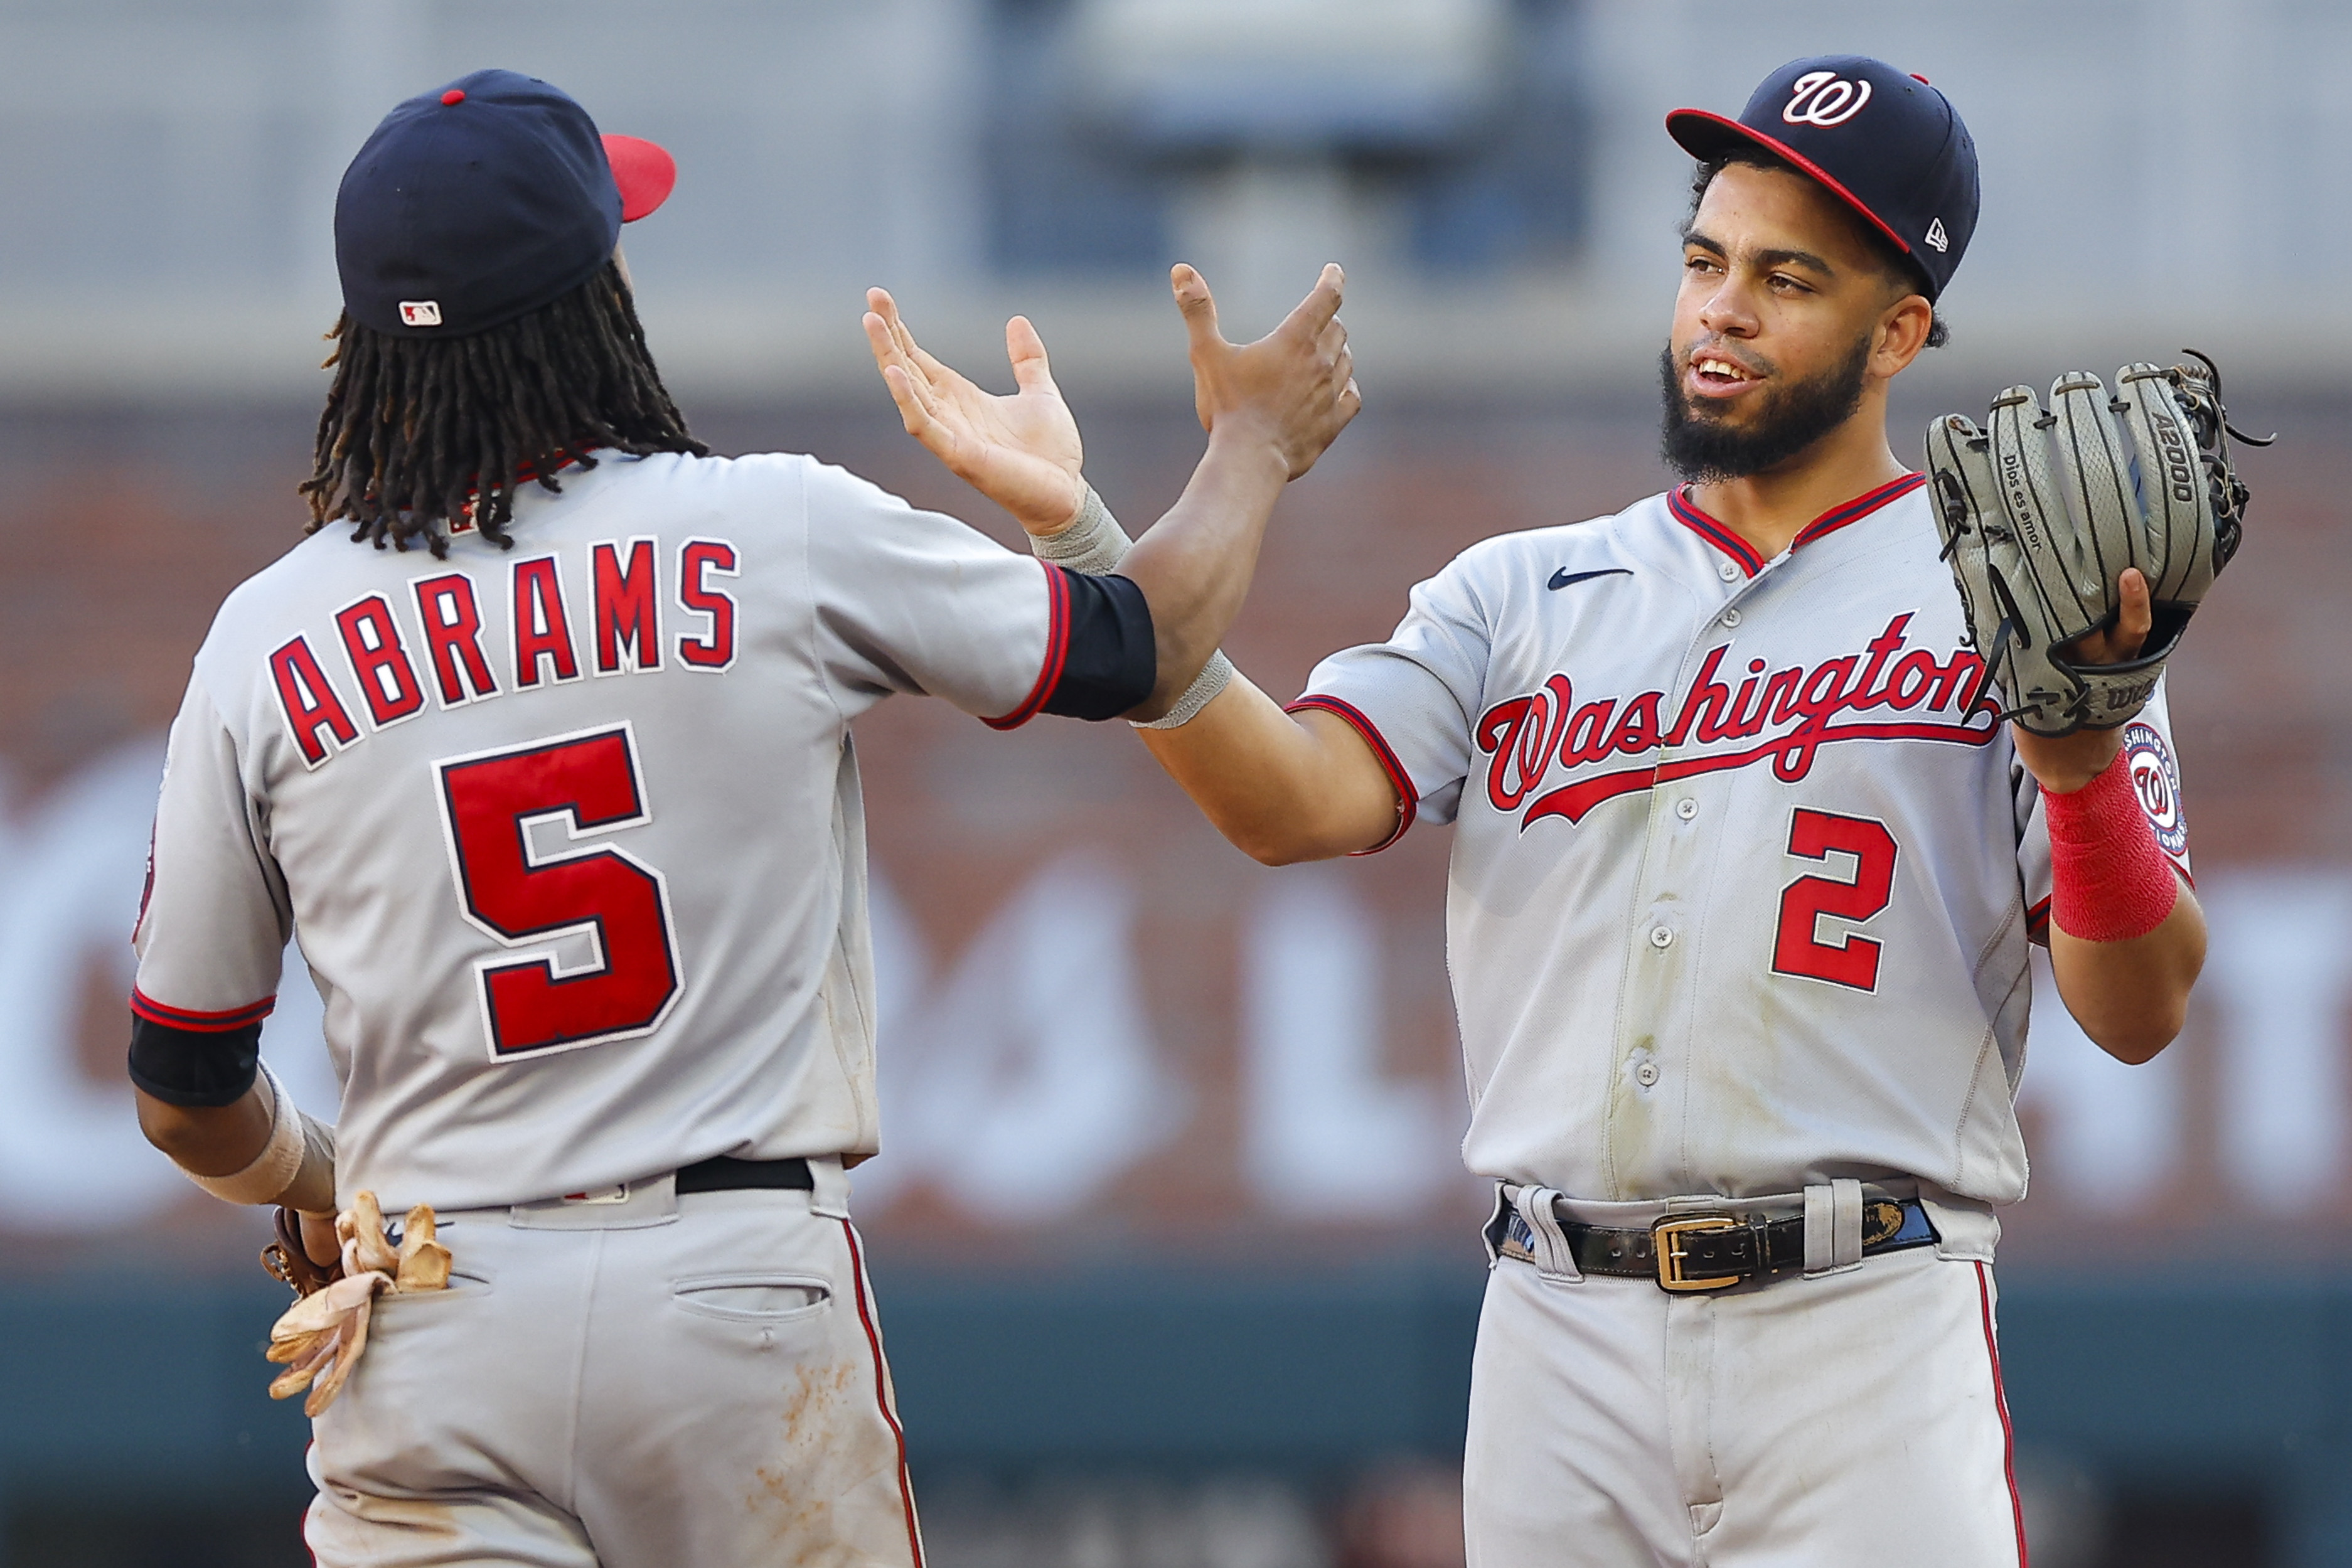 Boras upset Nats did not charter flight to ASG for Soto